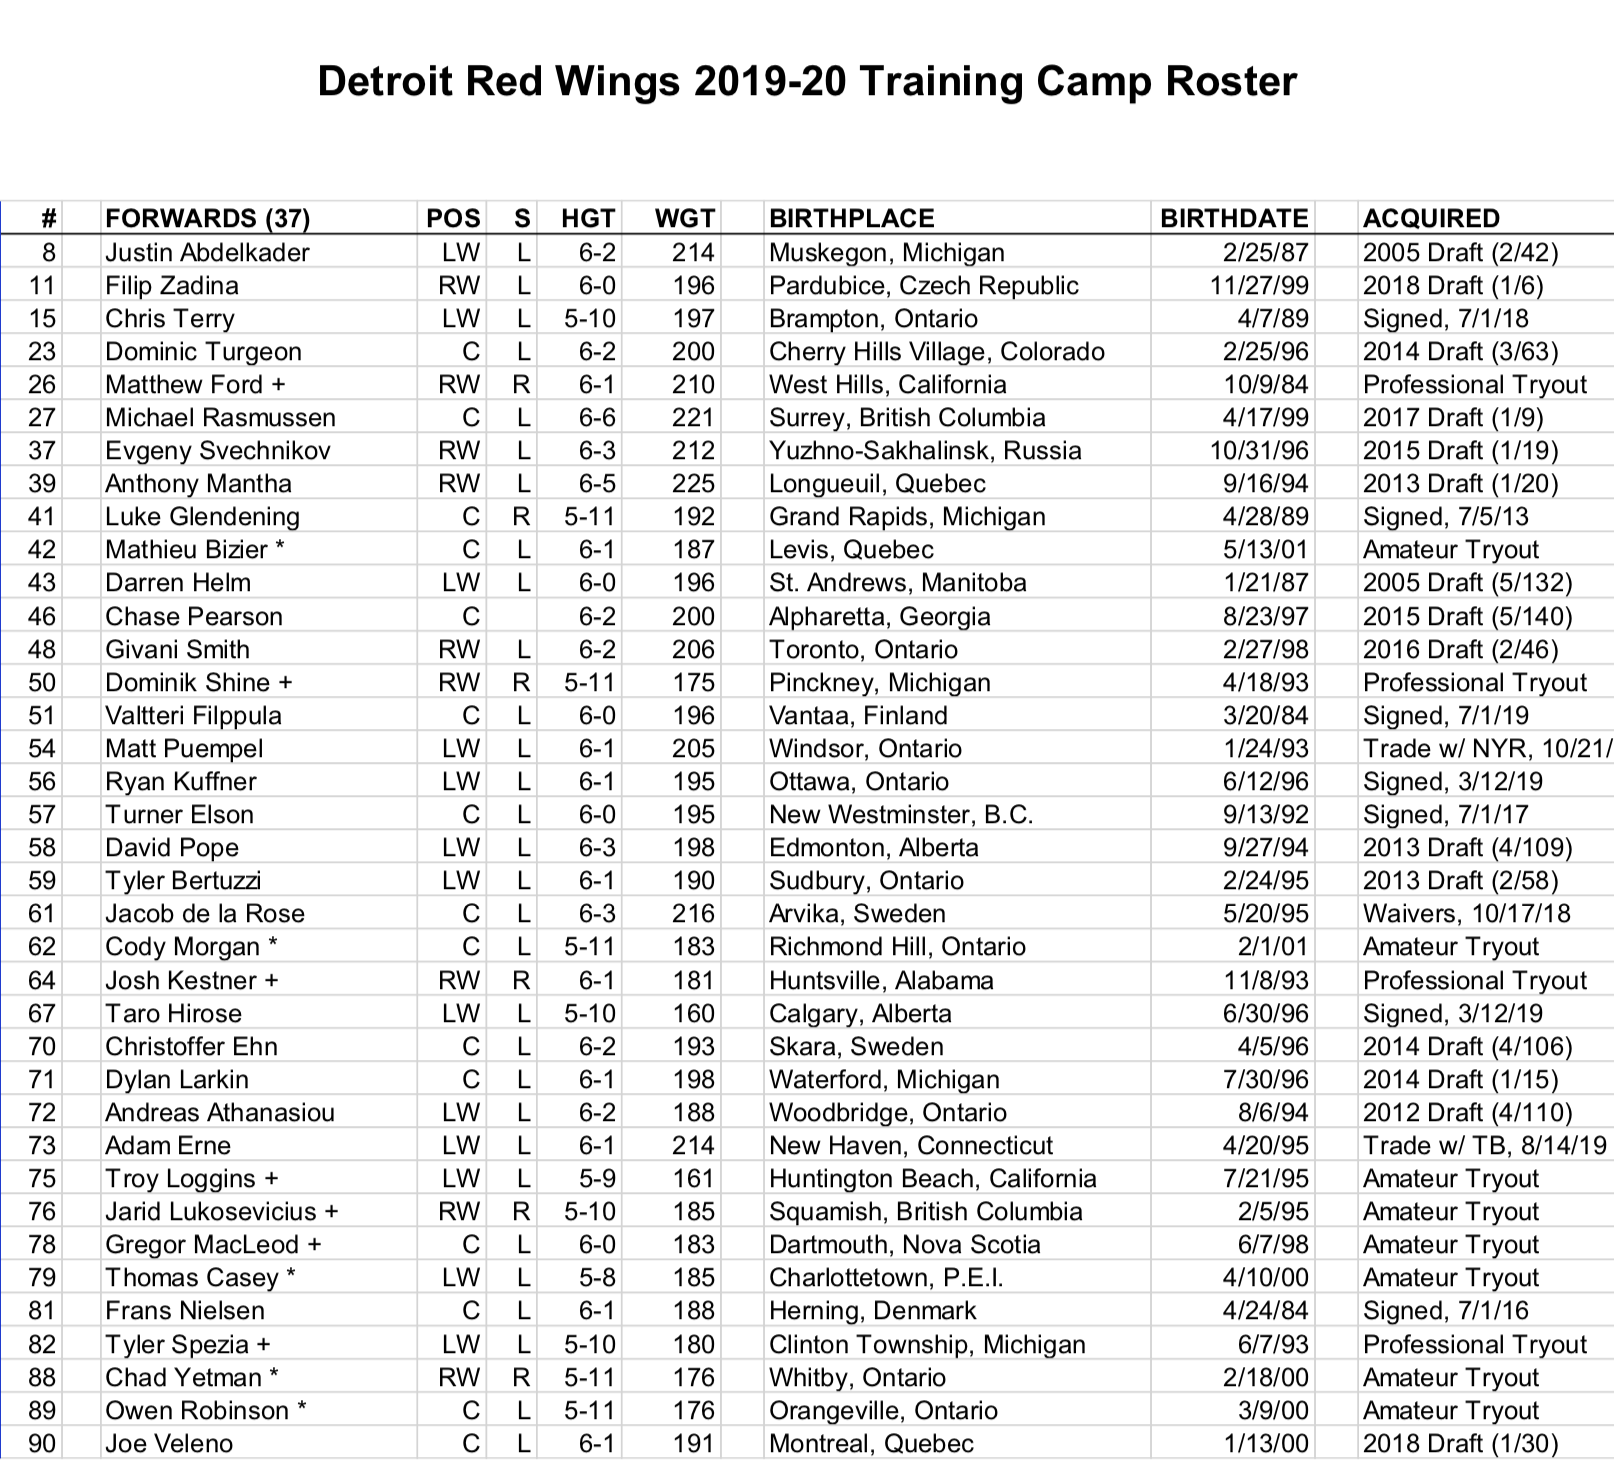 JUST IN Detroit Red Wings release 2019 Training Camp roster Detroit